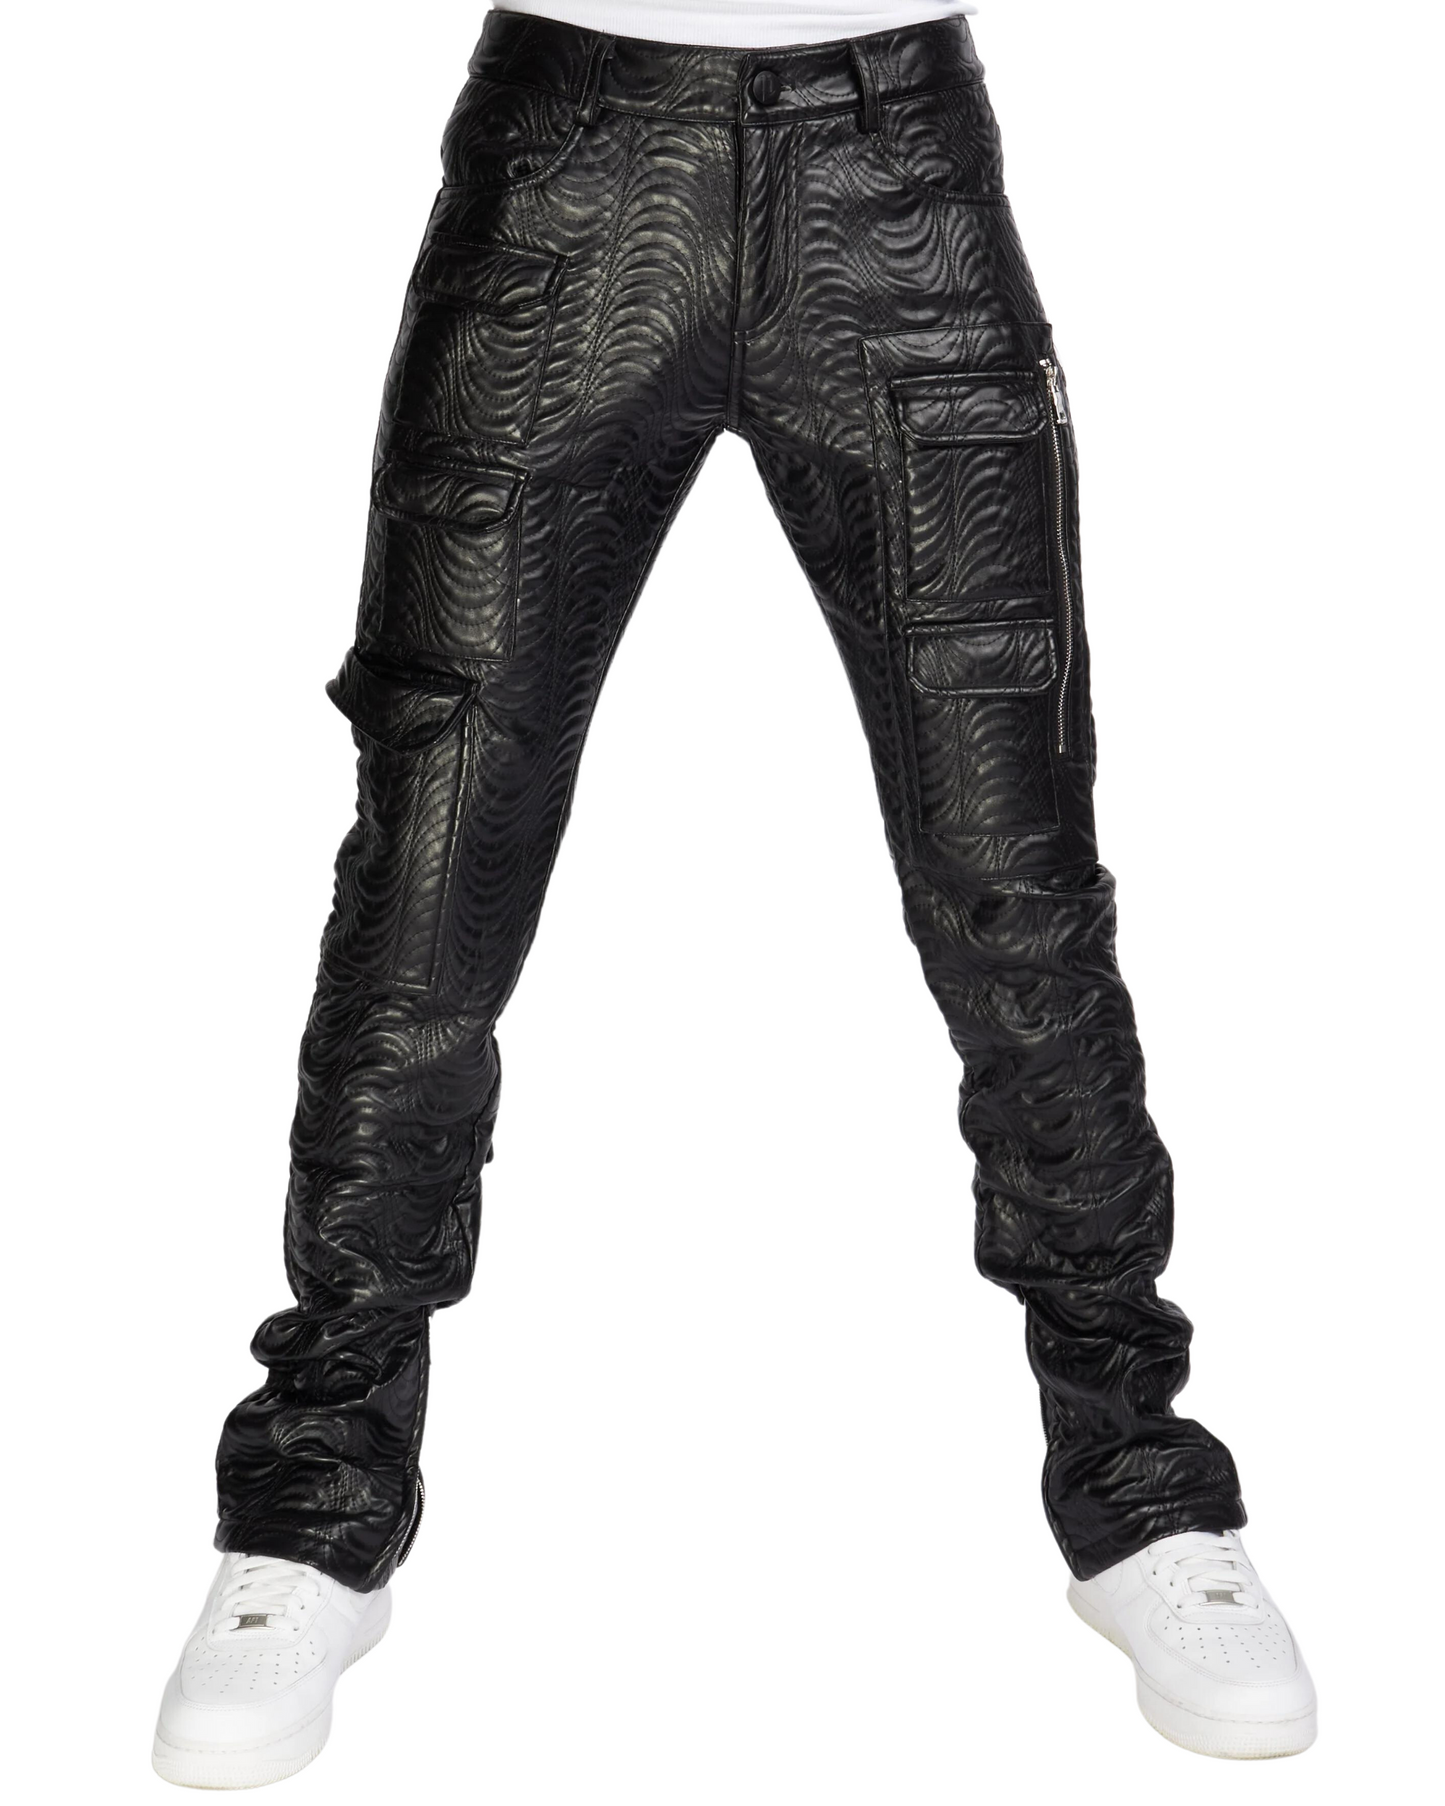 Murphy 551 PU Leather Stacked Jeans